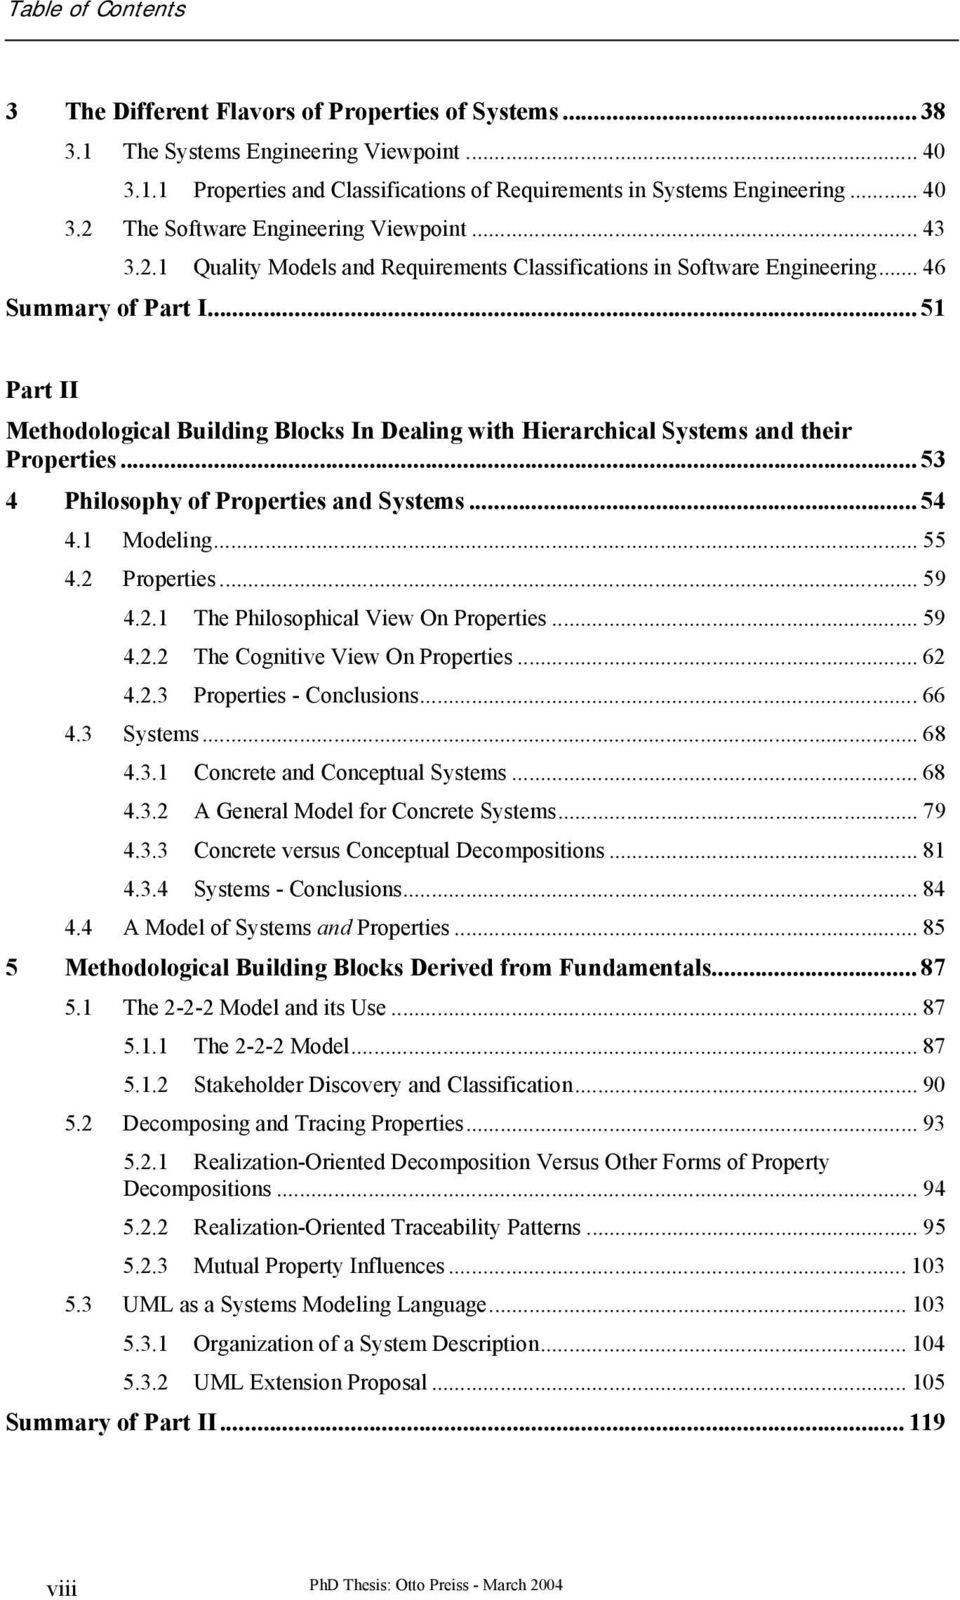 .. 51 Part II Methodological Building Blocks In Dealing with Hierarchical Systems and their Properties... 53 4 Philosophy of Properties and Systems... 54 4.1 Modeling... 55 4.2 